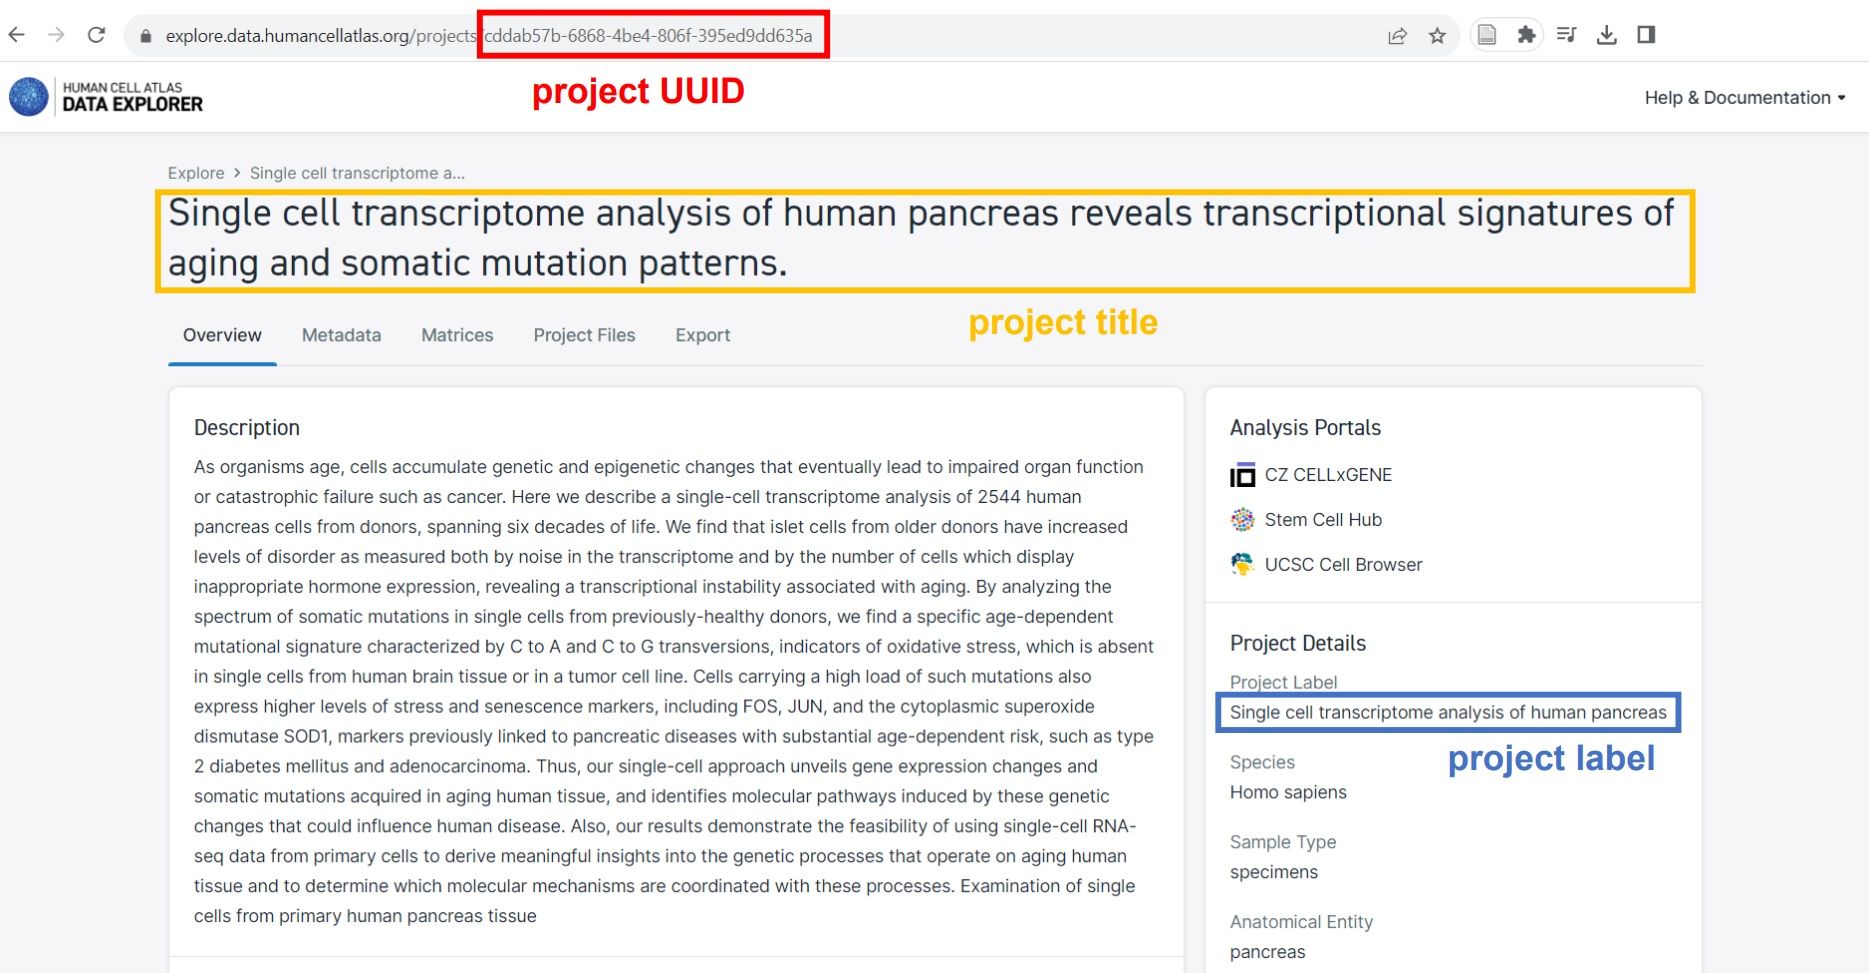 Image showing project UUID as a final fragment of link address, project title (self-explanatory) and project label as an entry in the box on the right side of the page.